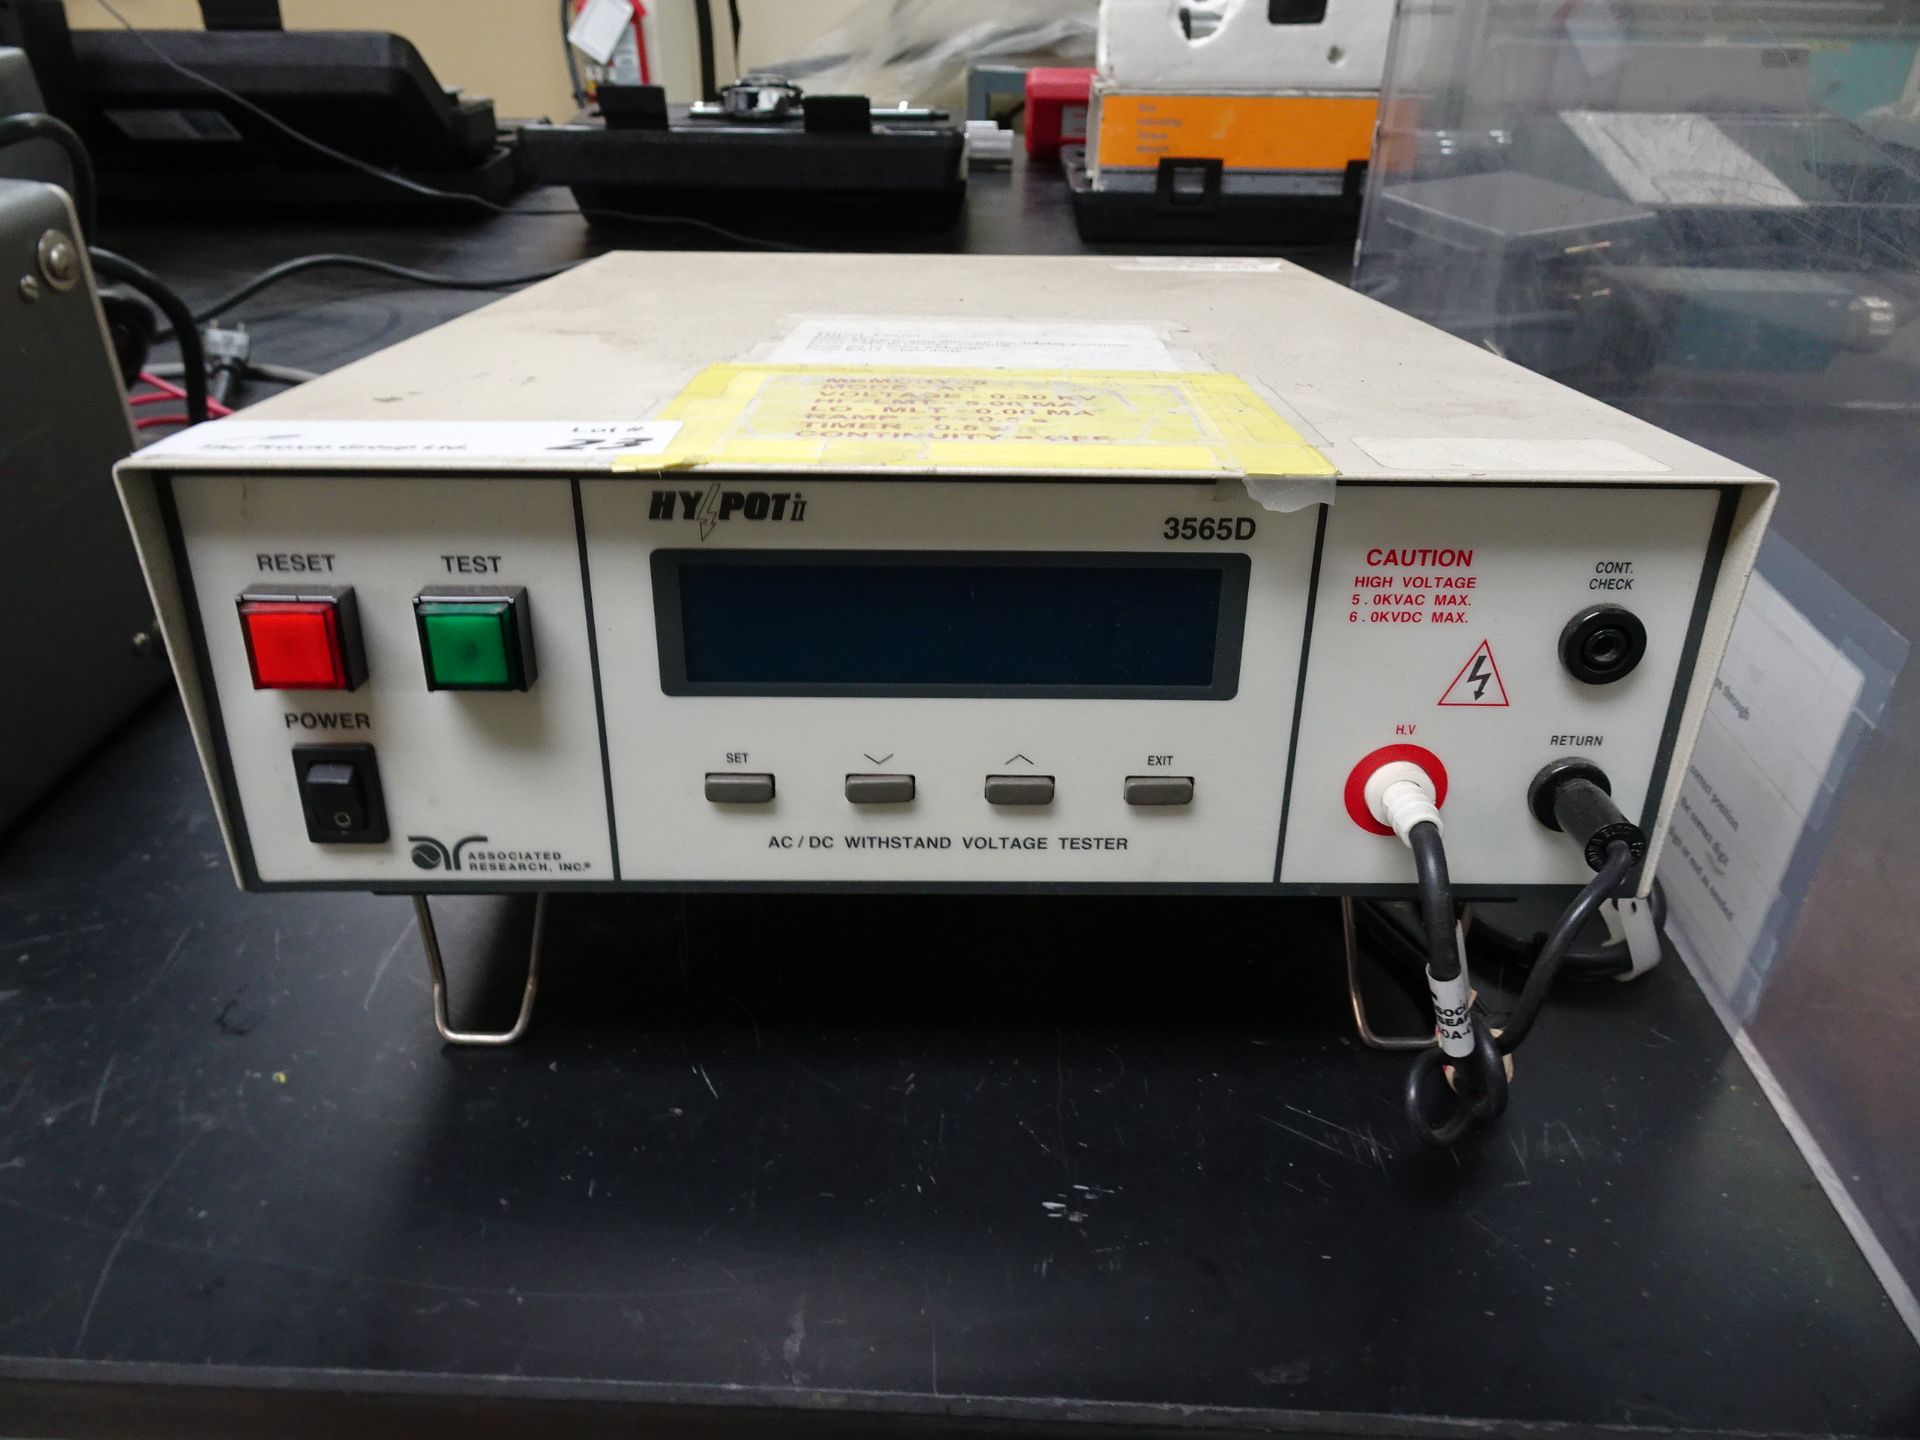 Associated Research Inc.Hipot 2 Series AC/DC Withstand Voltage Tester - Image 2 of 4